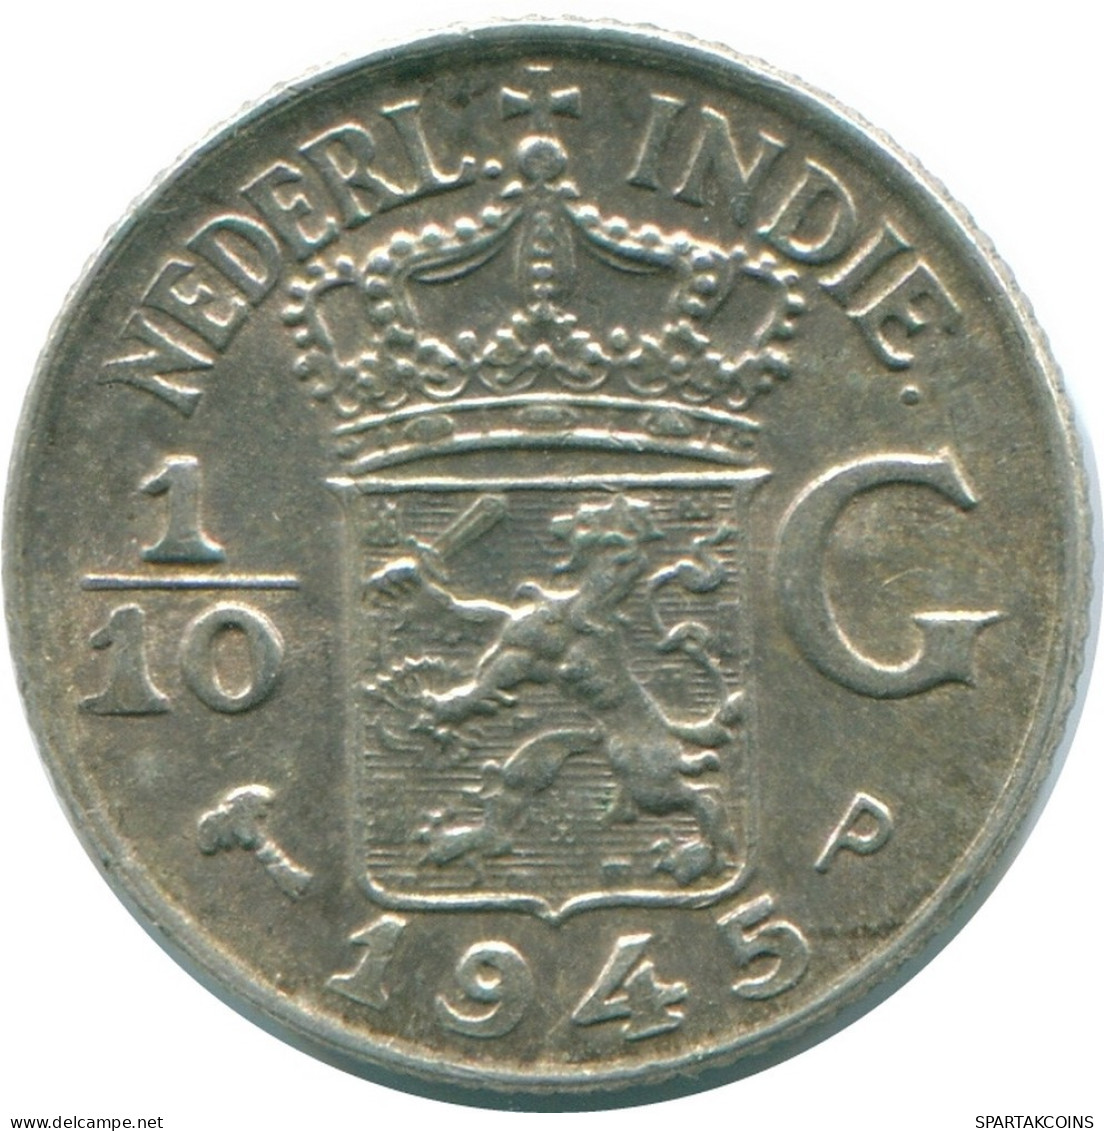 1/10 GULDEN 1945 P NETHERLANDS EAST INDIES SILVER Colonial Coin #NL14093.3.U.A - Indie Olandesi